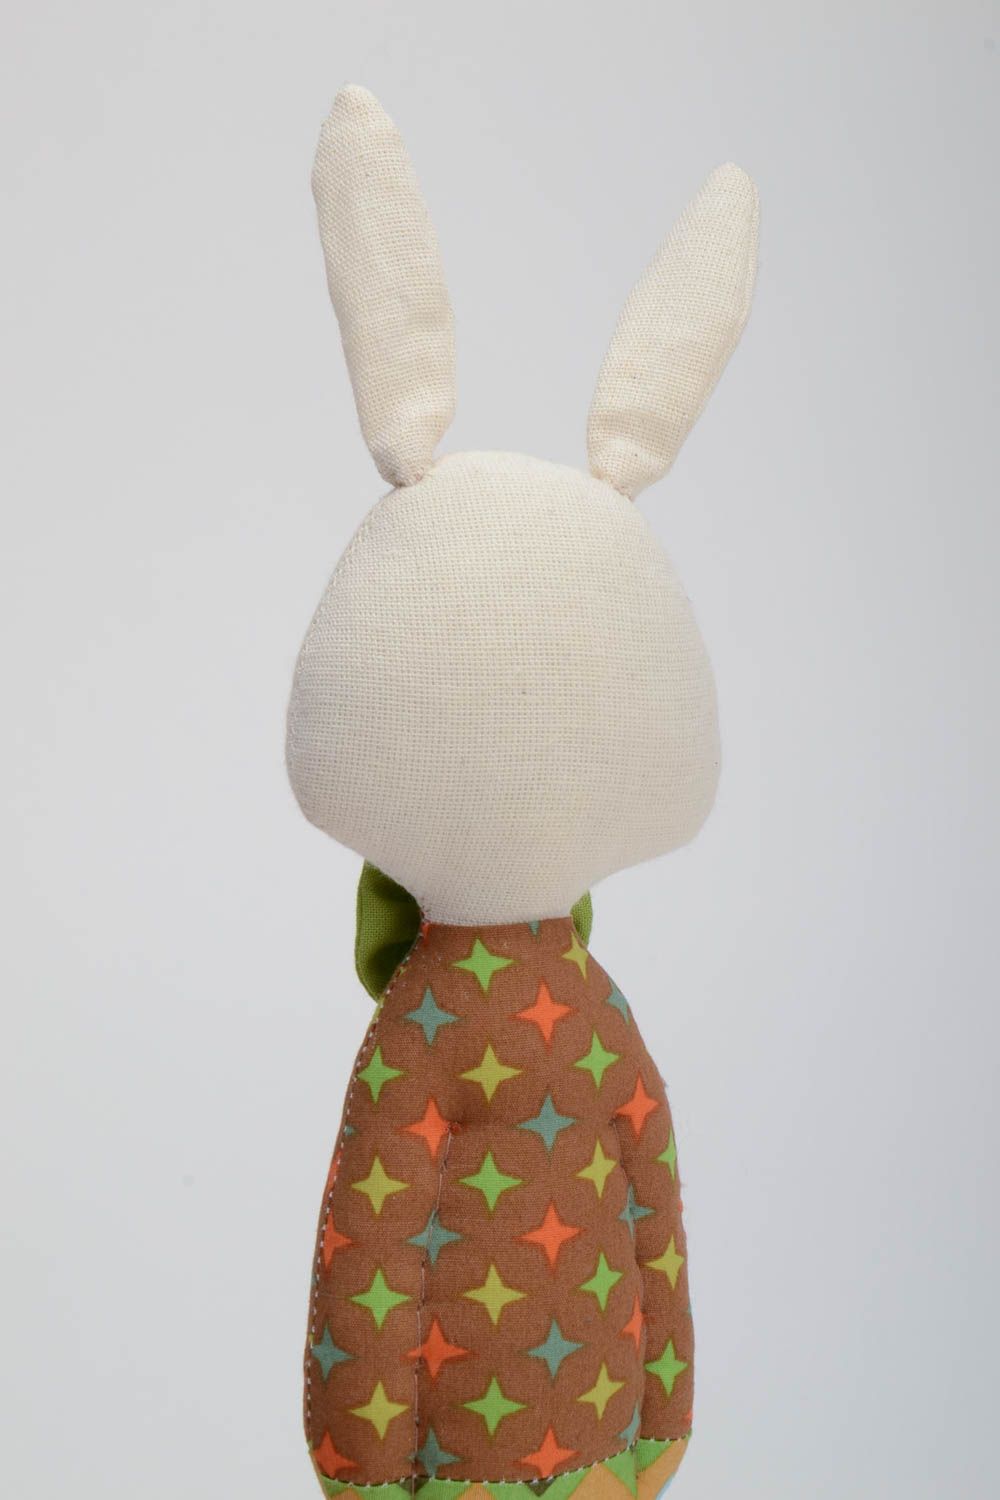 Handmade cotton fabric soft toy funny rabbit in colorful suit with green bow tie photo 4